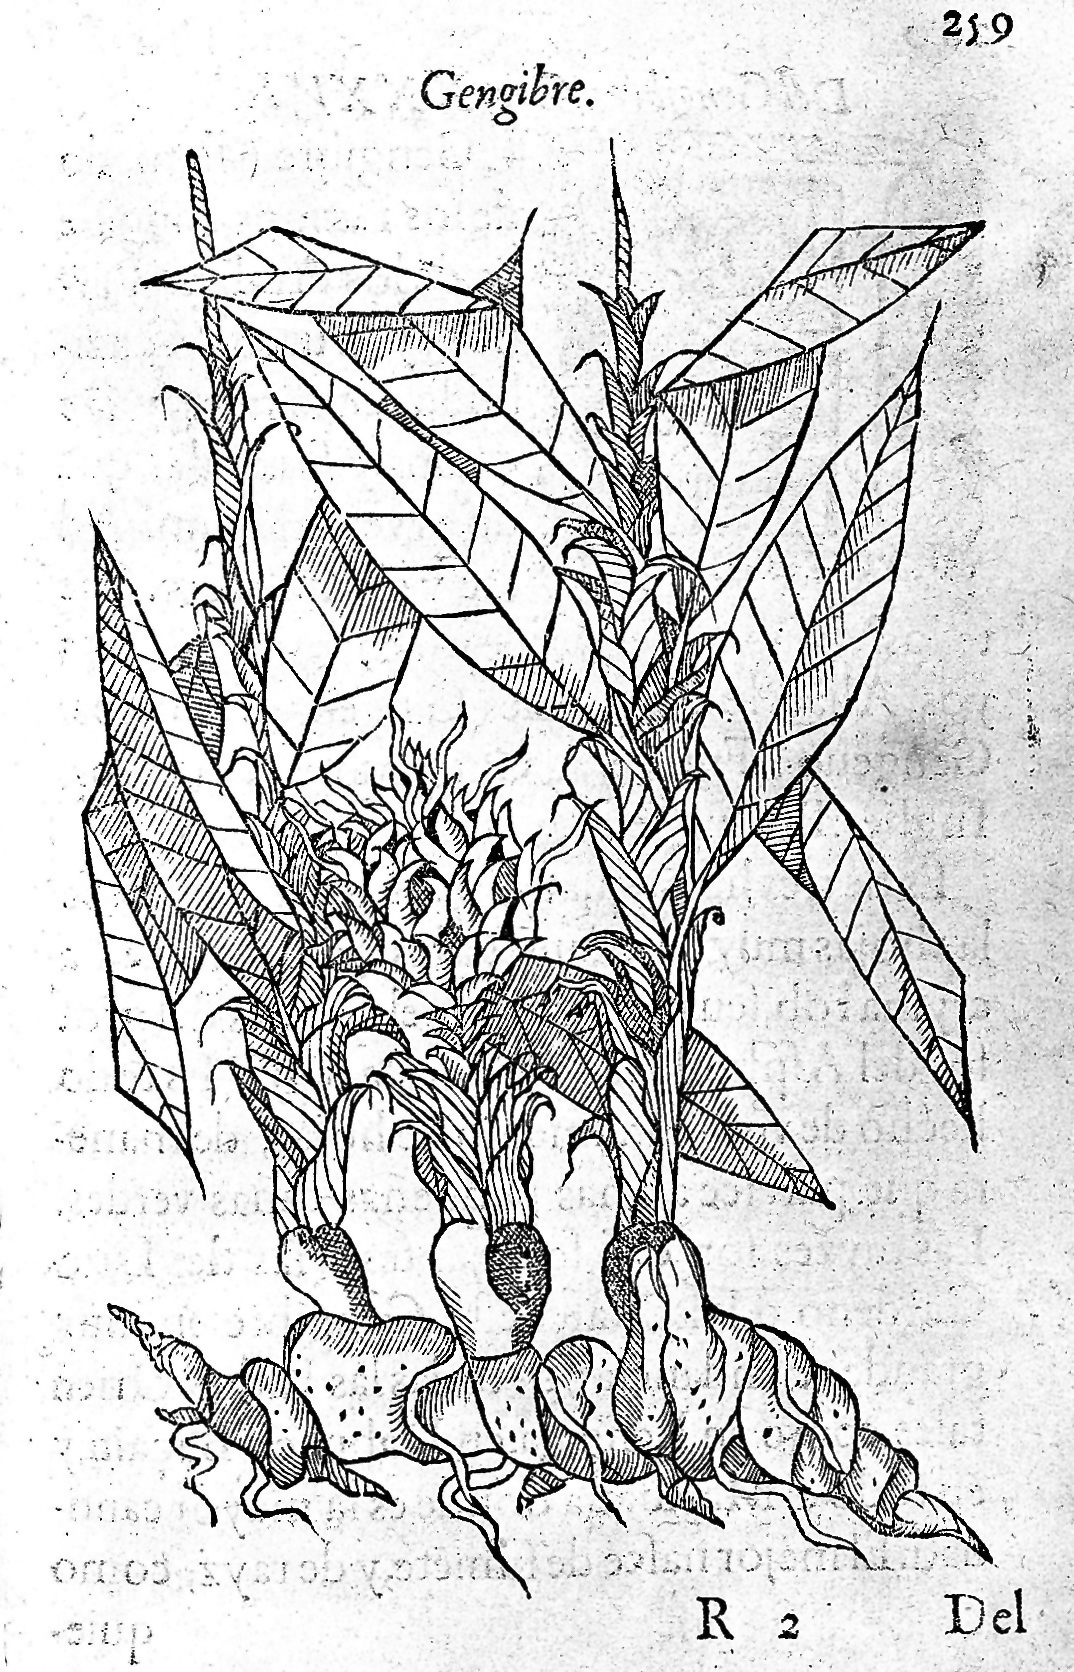 A woodcut print of the ginger plant, from a 16th century medical textbook.